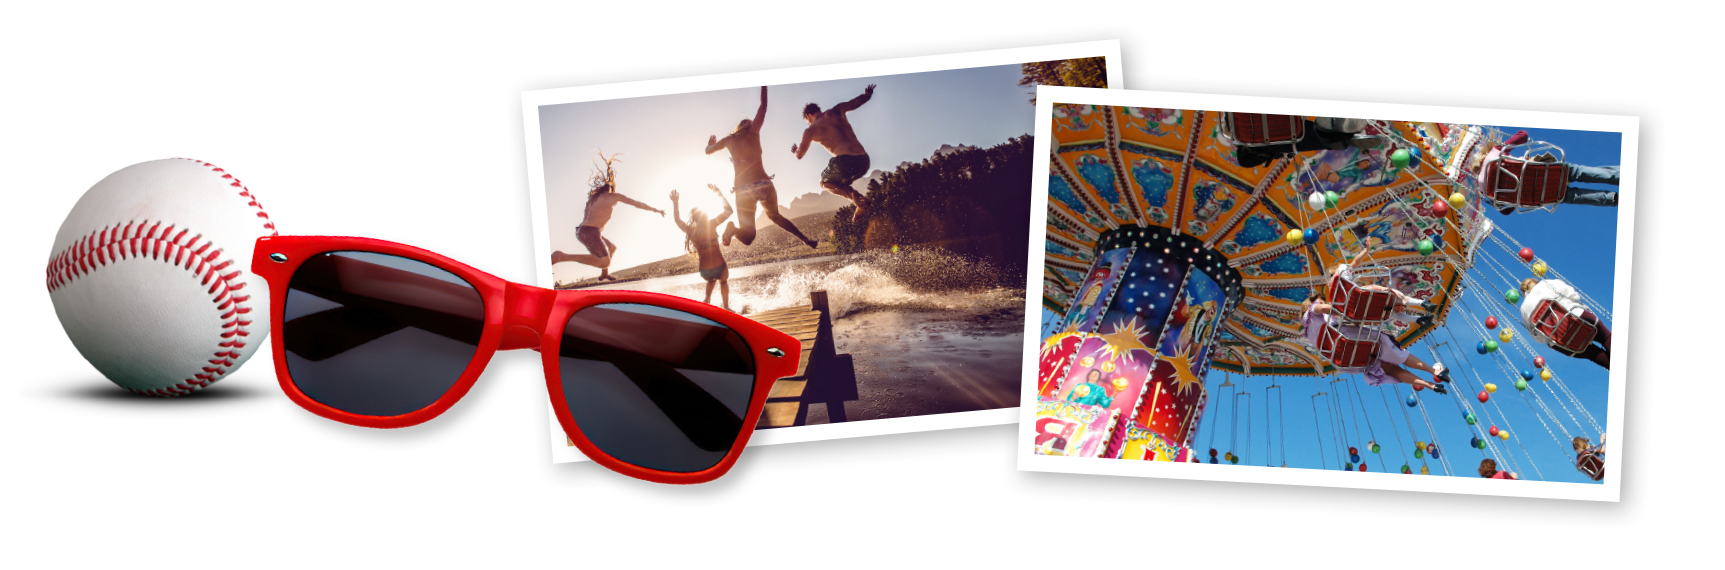 Image collage: sunglasses, baseball, people jumping into water, carnival rides, a cheesesteak